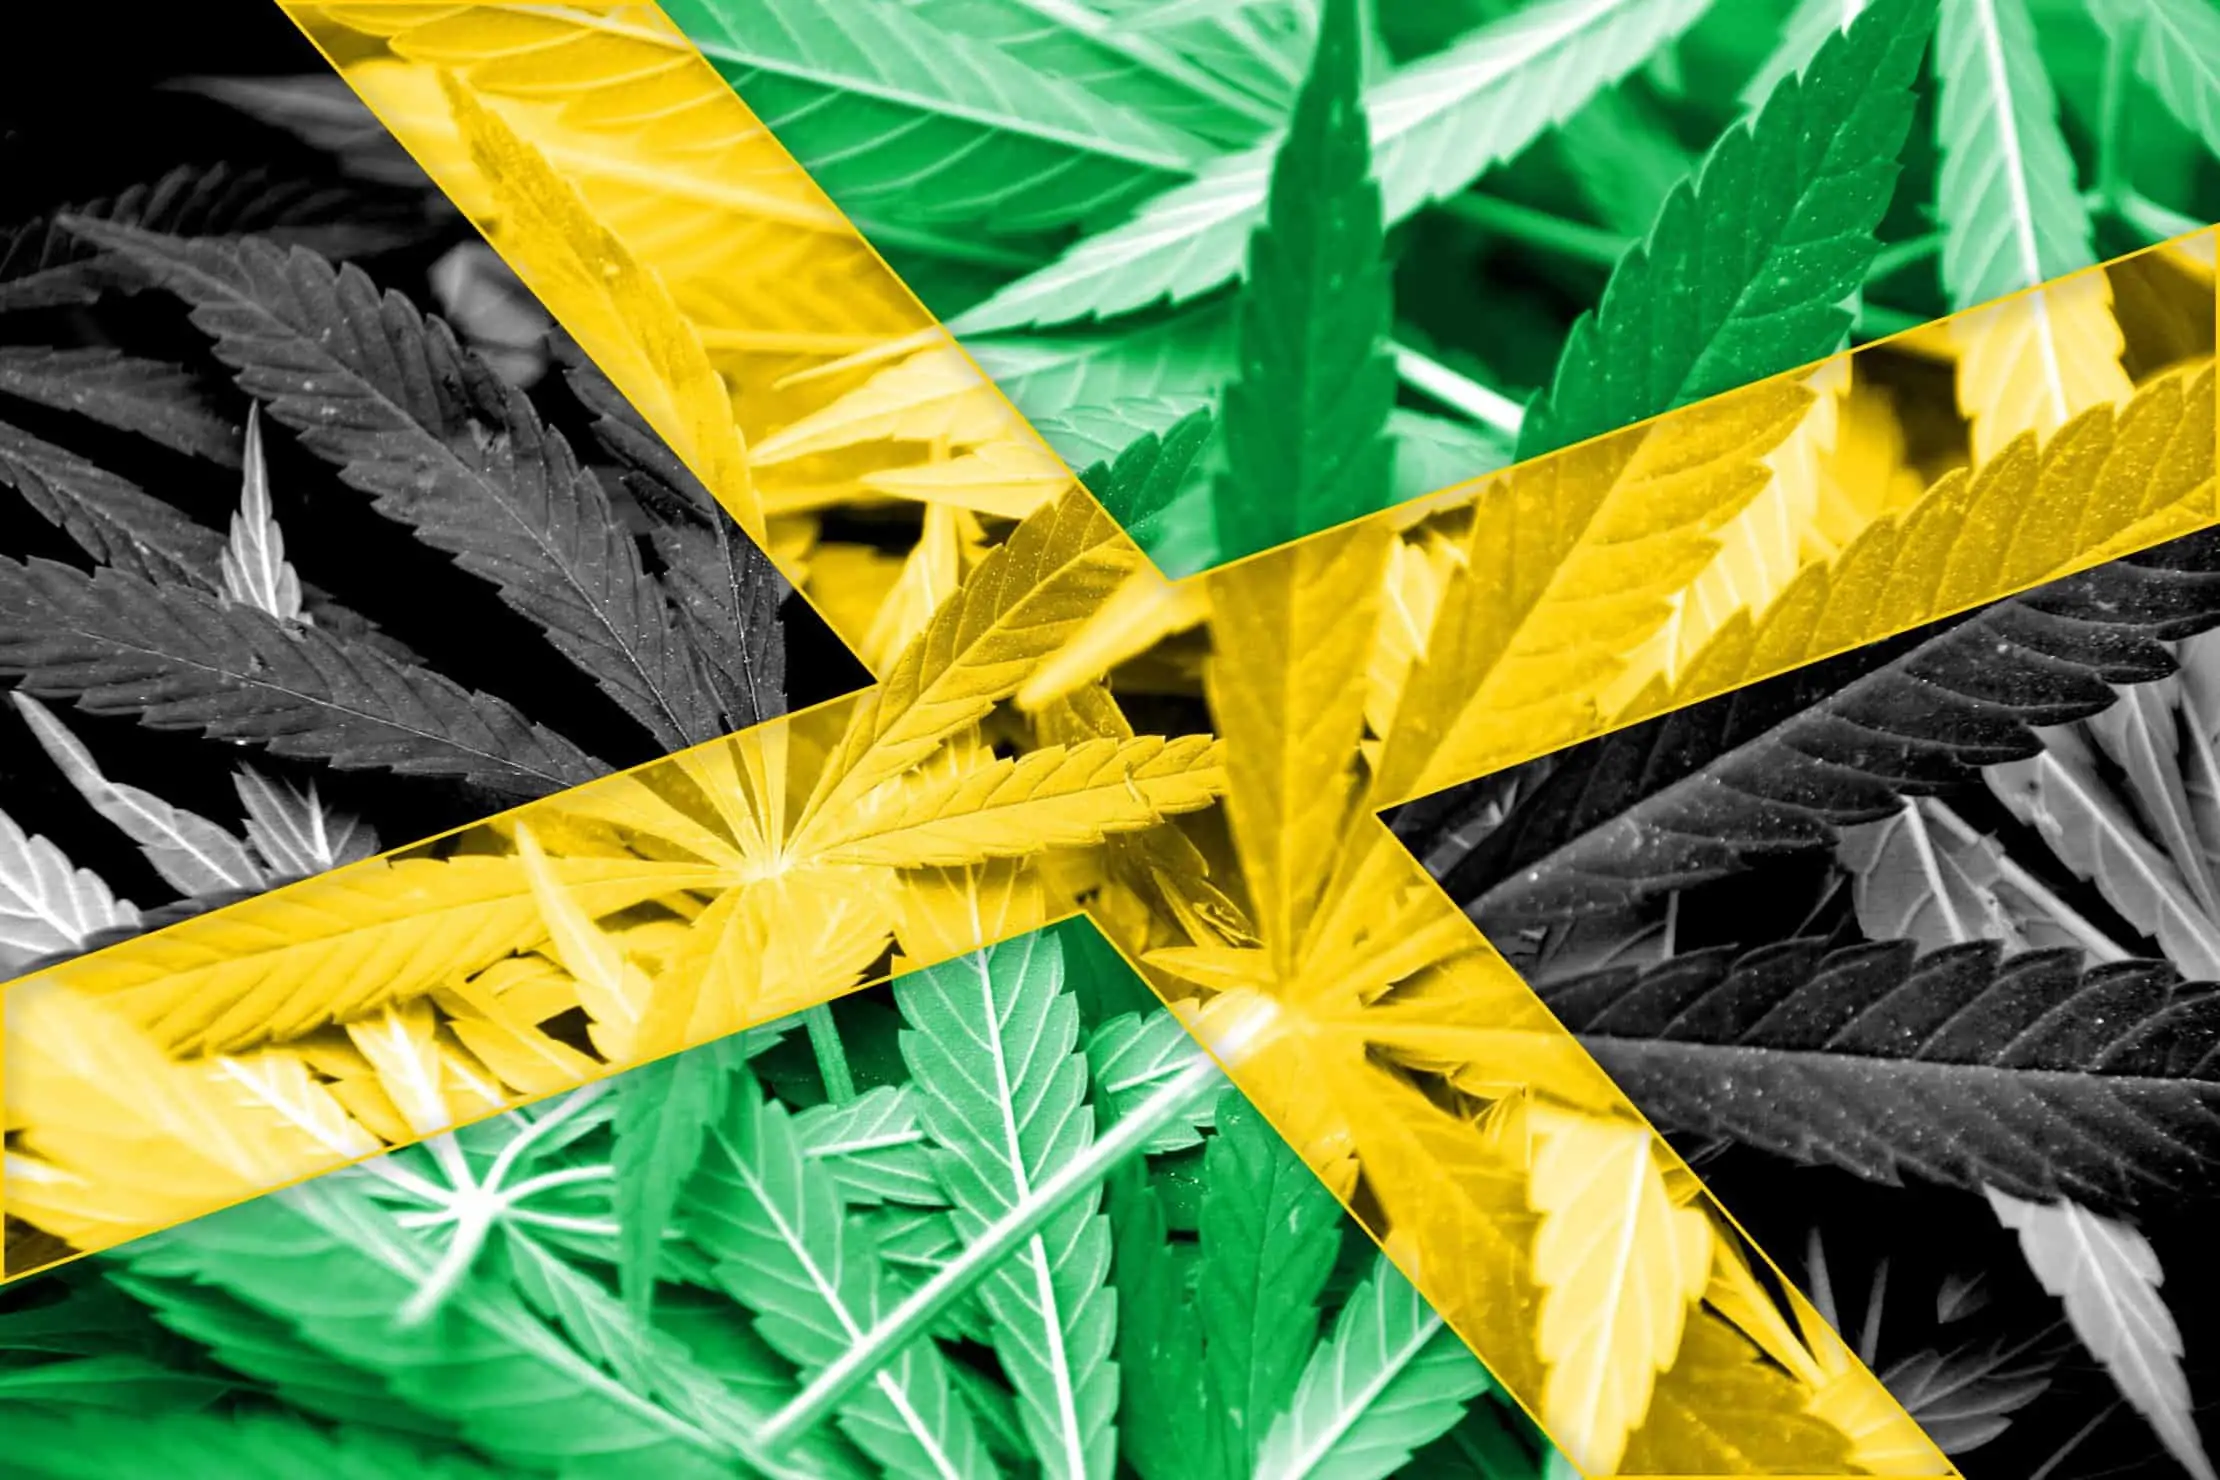 A Look at Cannabis Culture in Jamaica